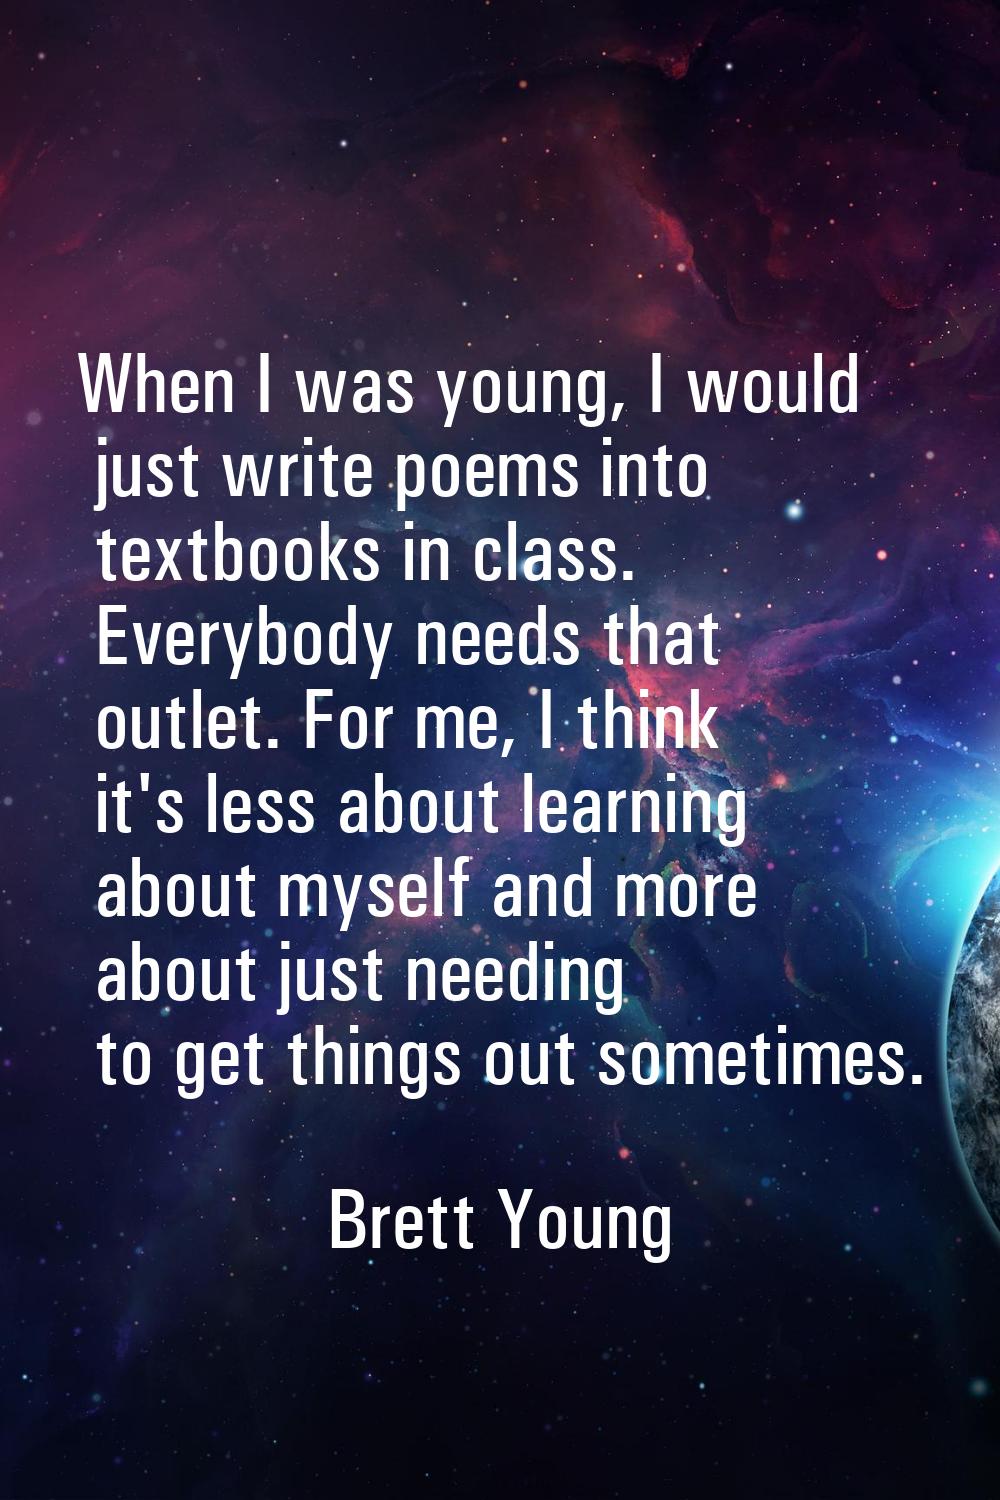 When I was young, I would just write poems into textbooks in class. Everybody needs that outlet. Fo